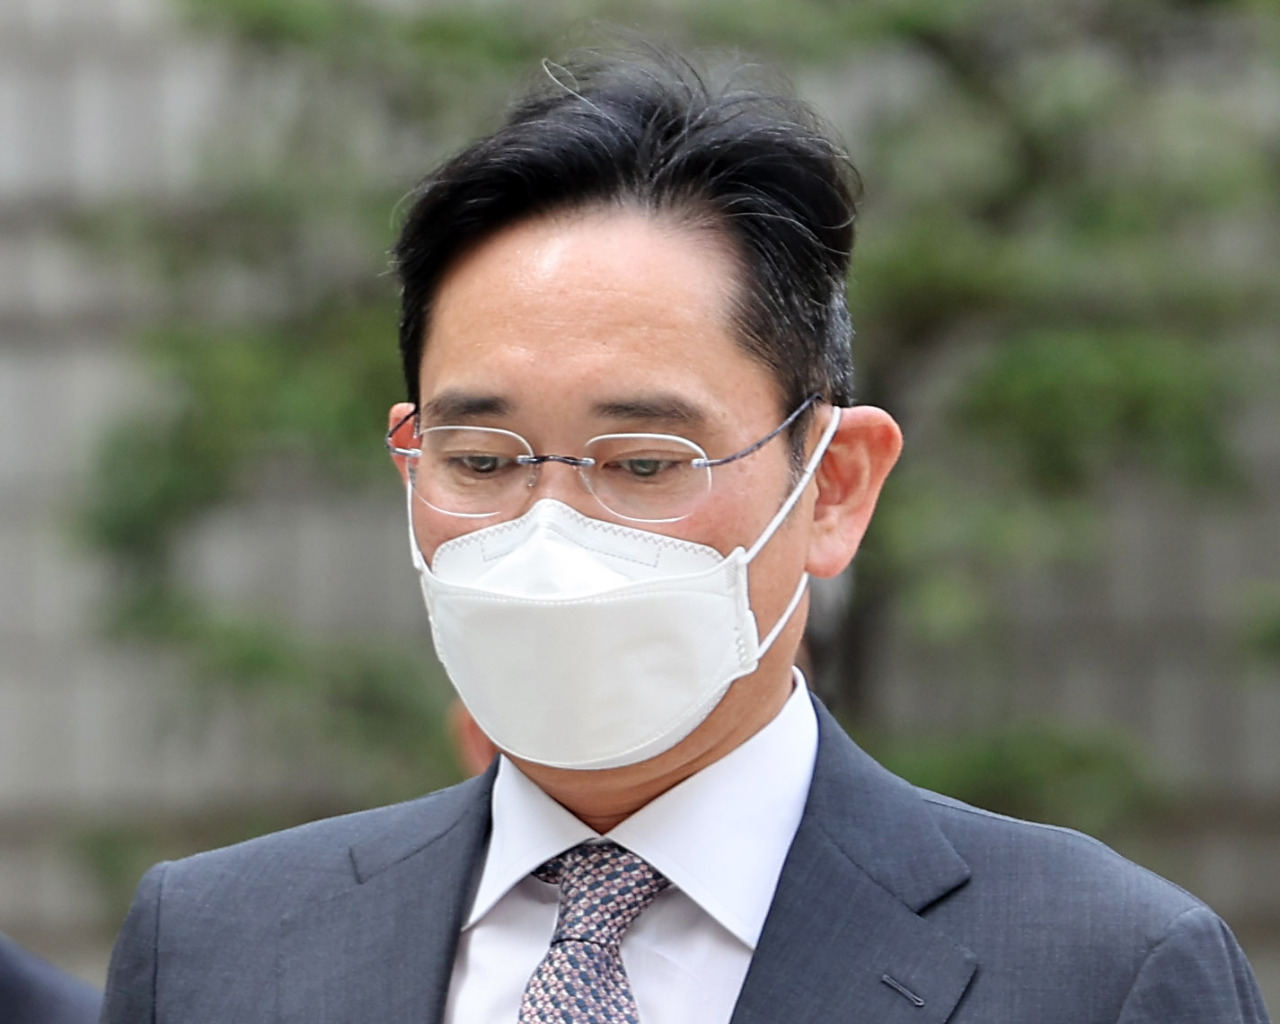 In this photo taken Thursday, Samsung Vice Chairman Lee Jae-yong attends a trial over his alleged influence over the Samsung merger case in 2015. (Yonhap)